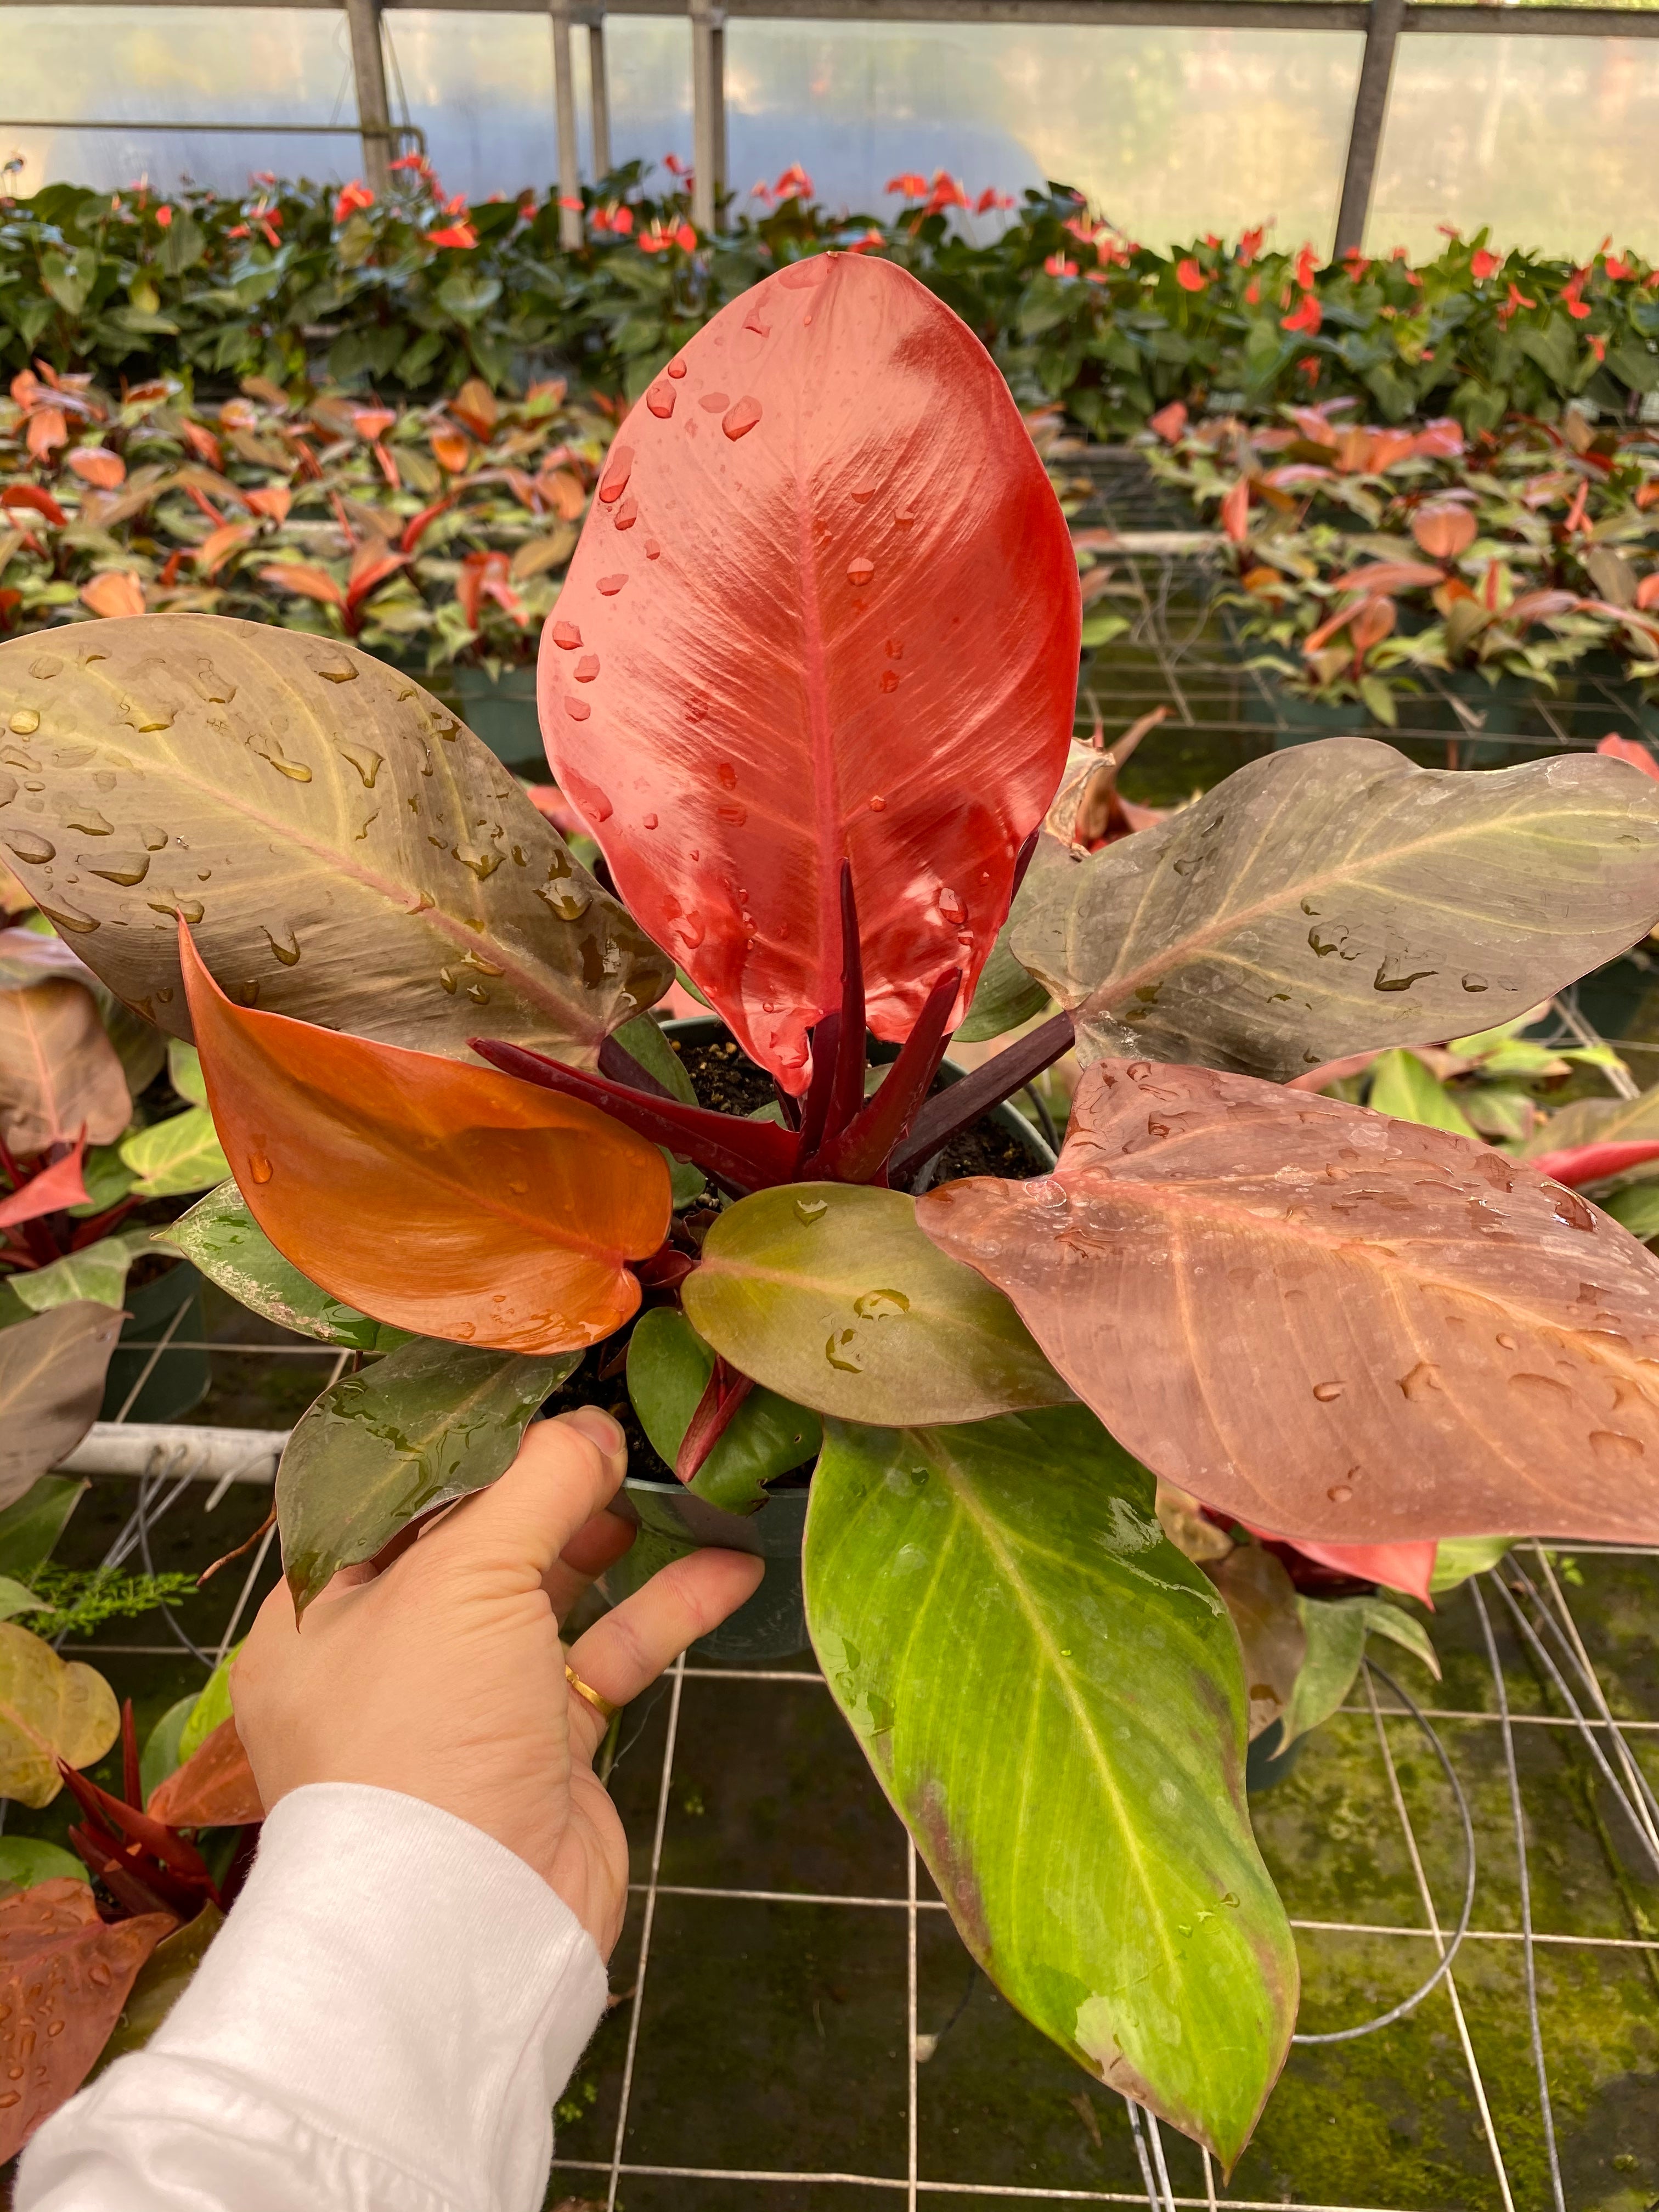 Philodendron 'prince of orange' being held by a hand in a greenhouse.